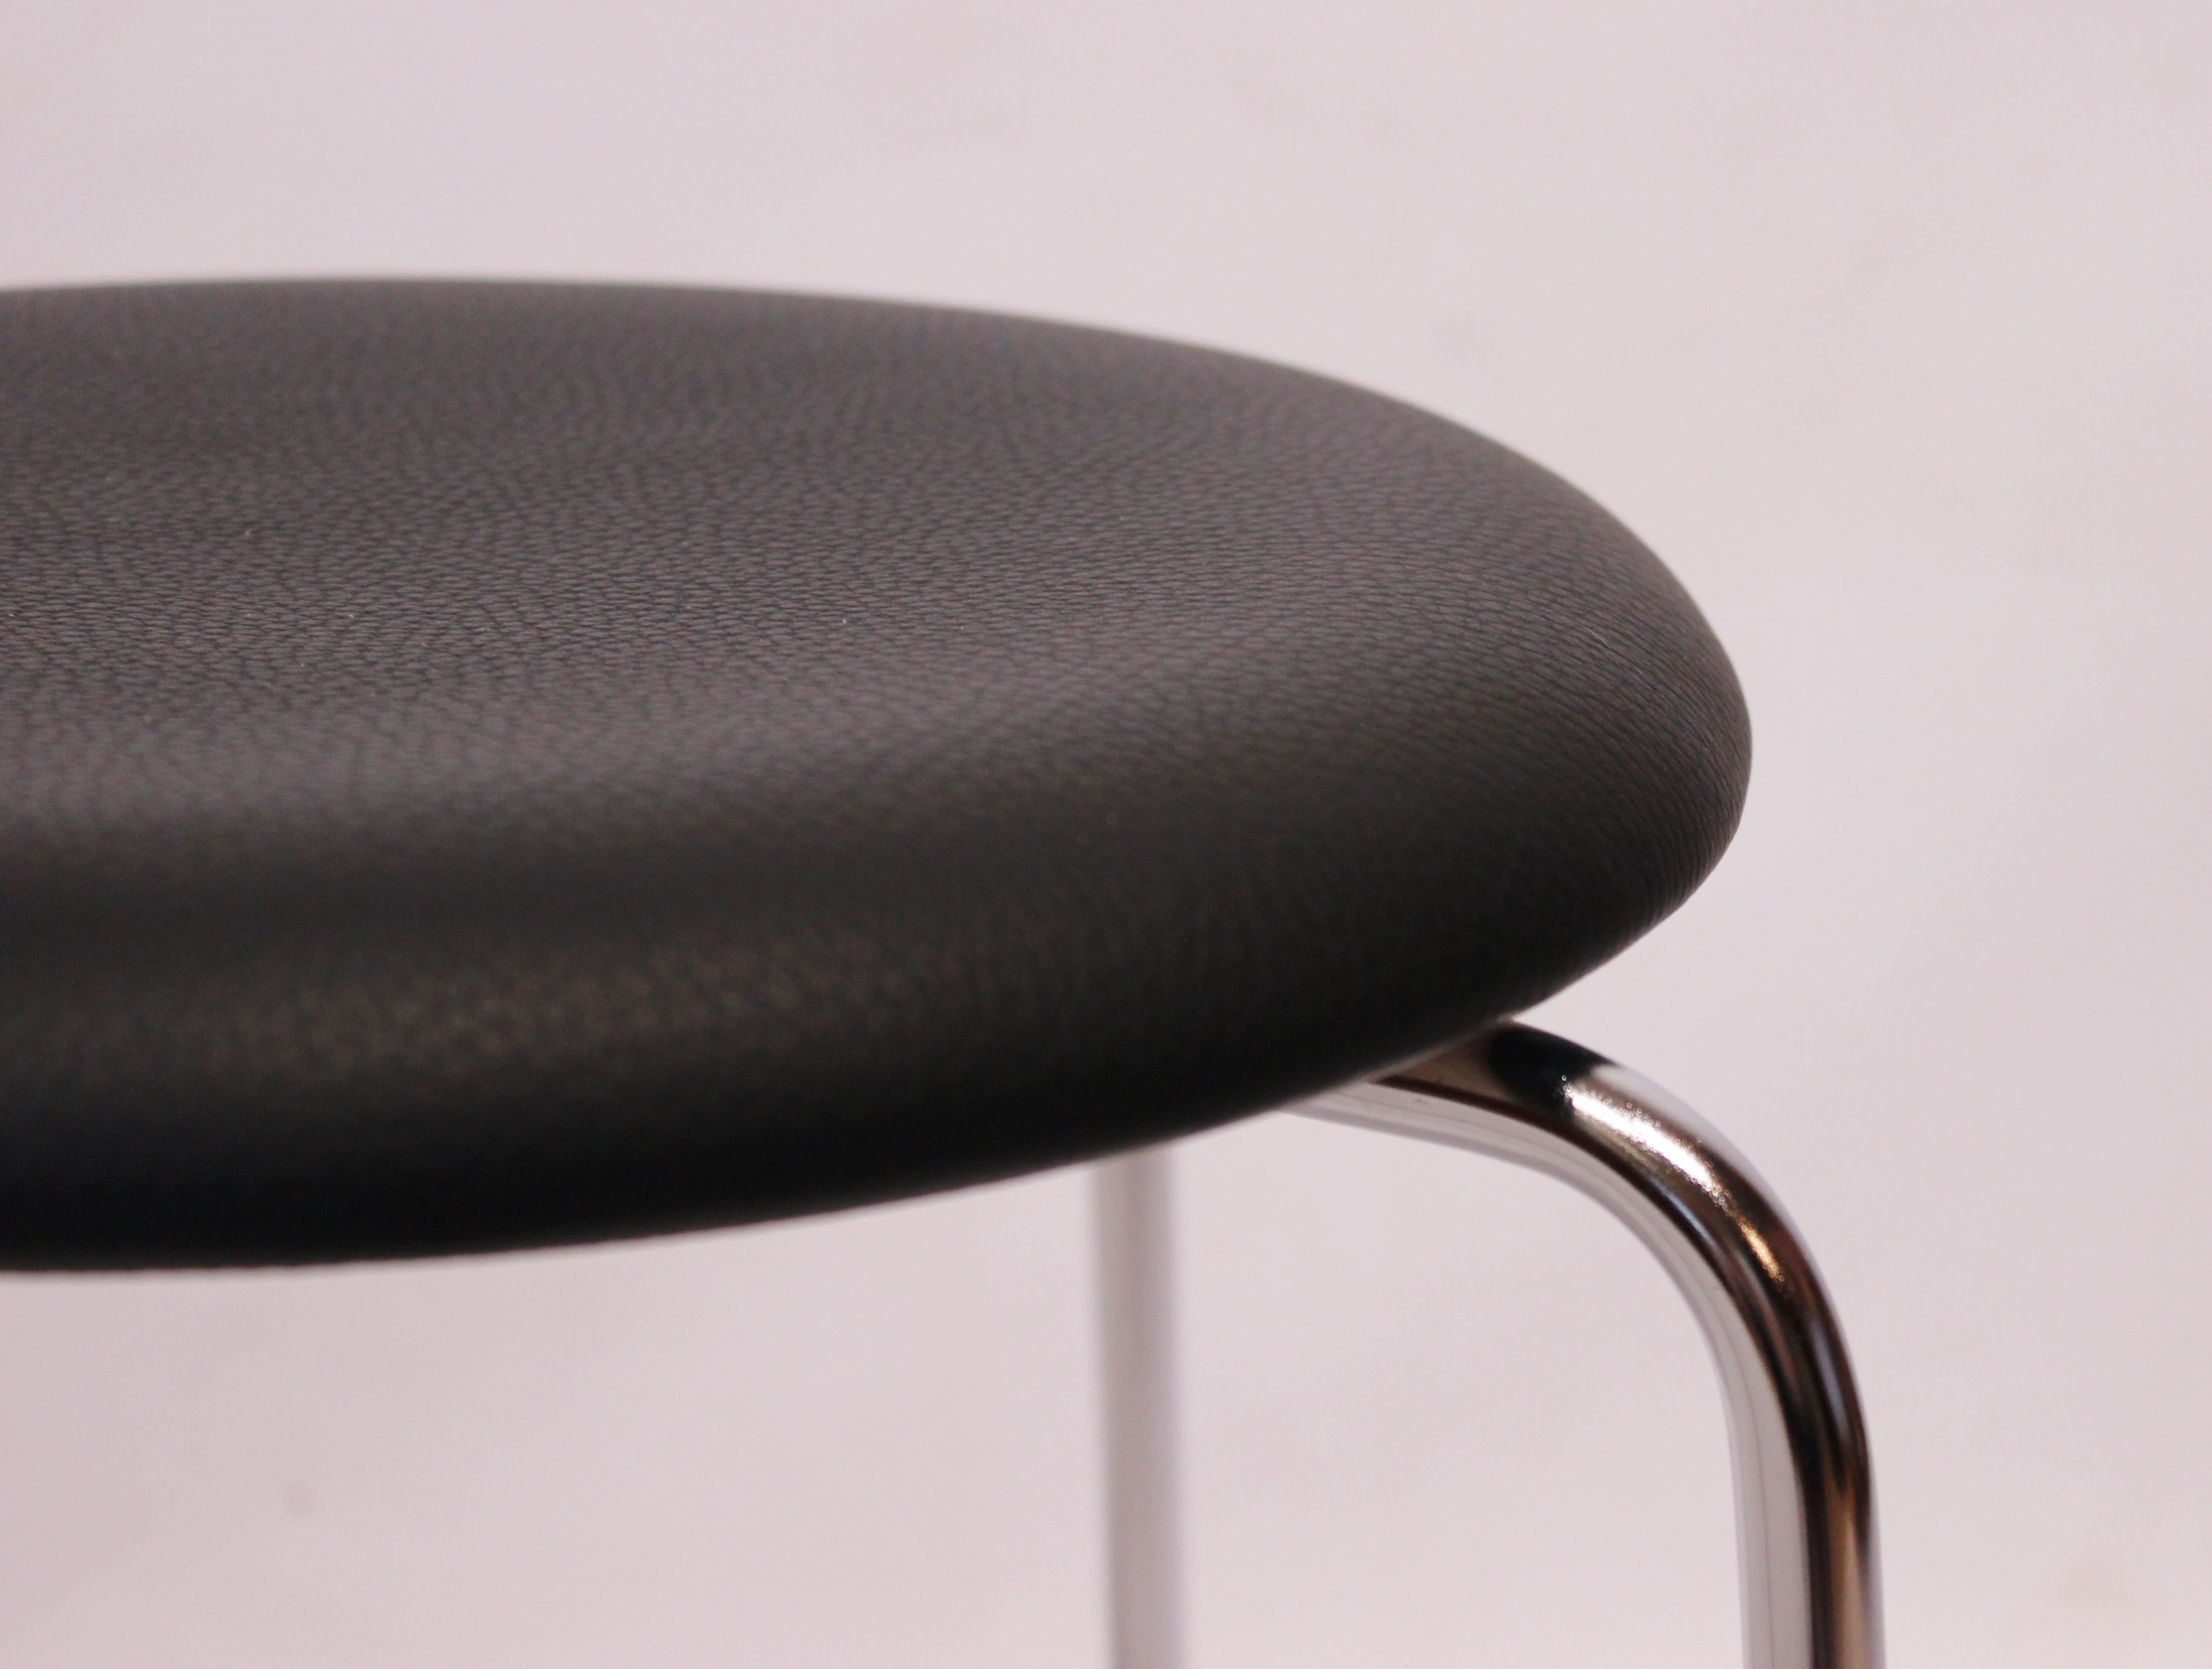 Scandinavian Modern Pair of Dot Stools Upholstered with Black Leather by Arne Jacobsen, 1971 For Sale